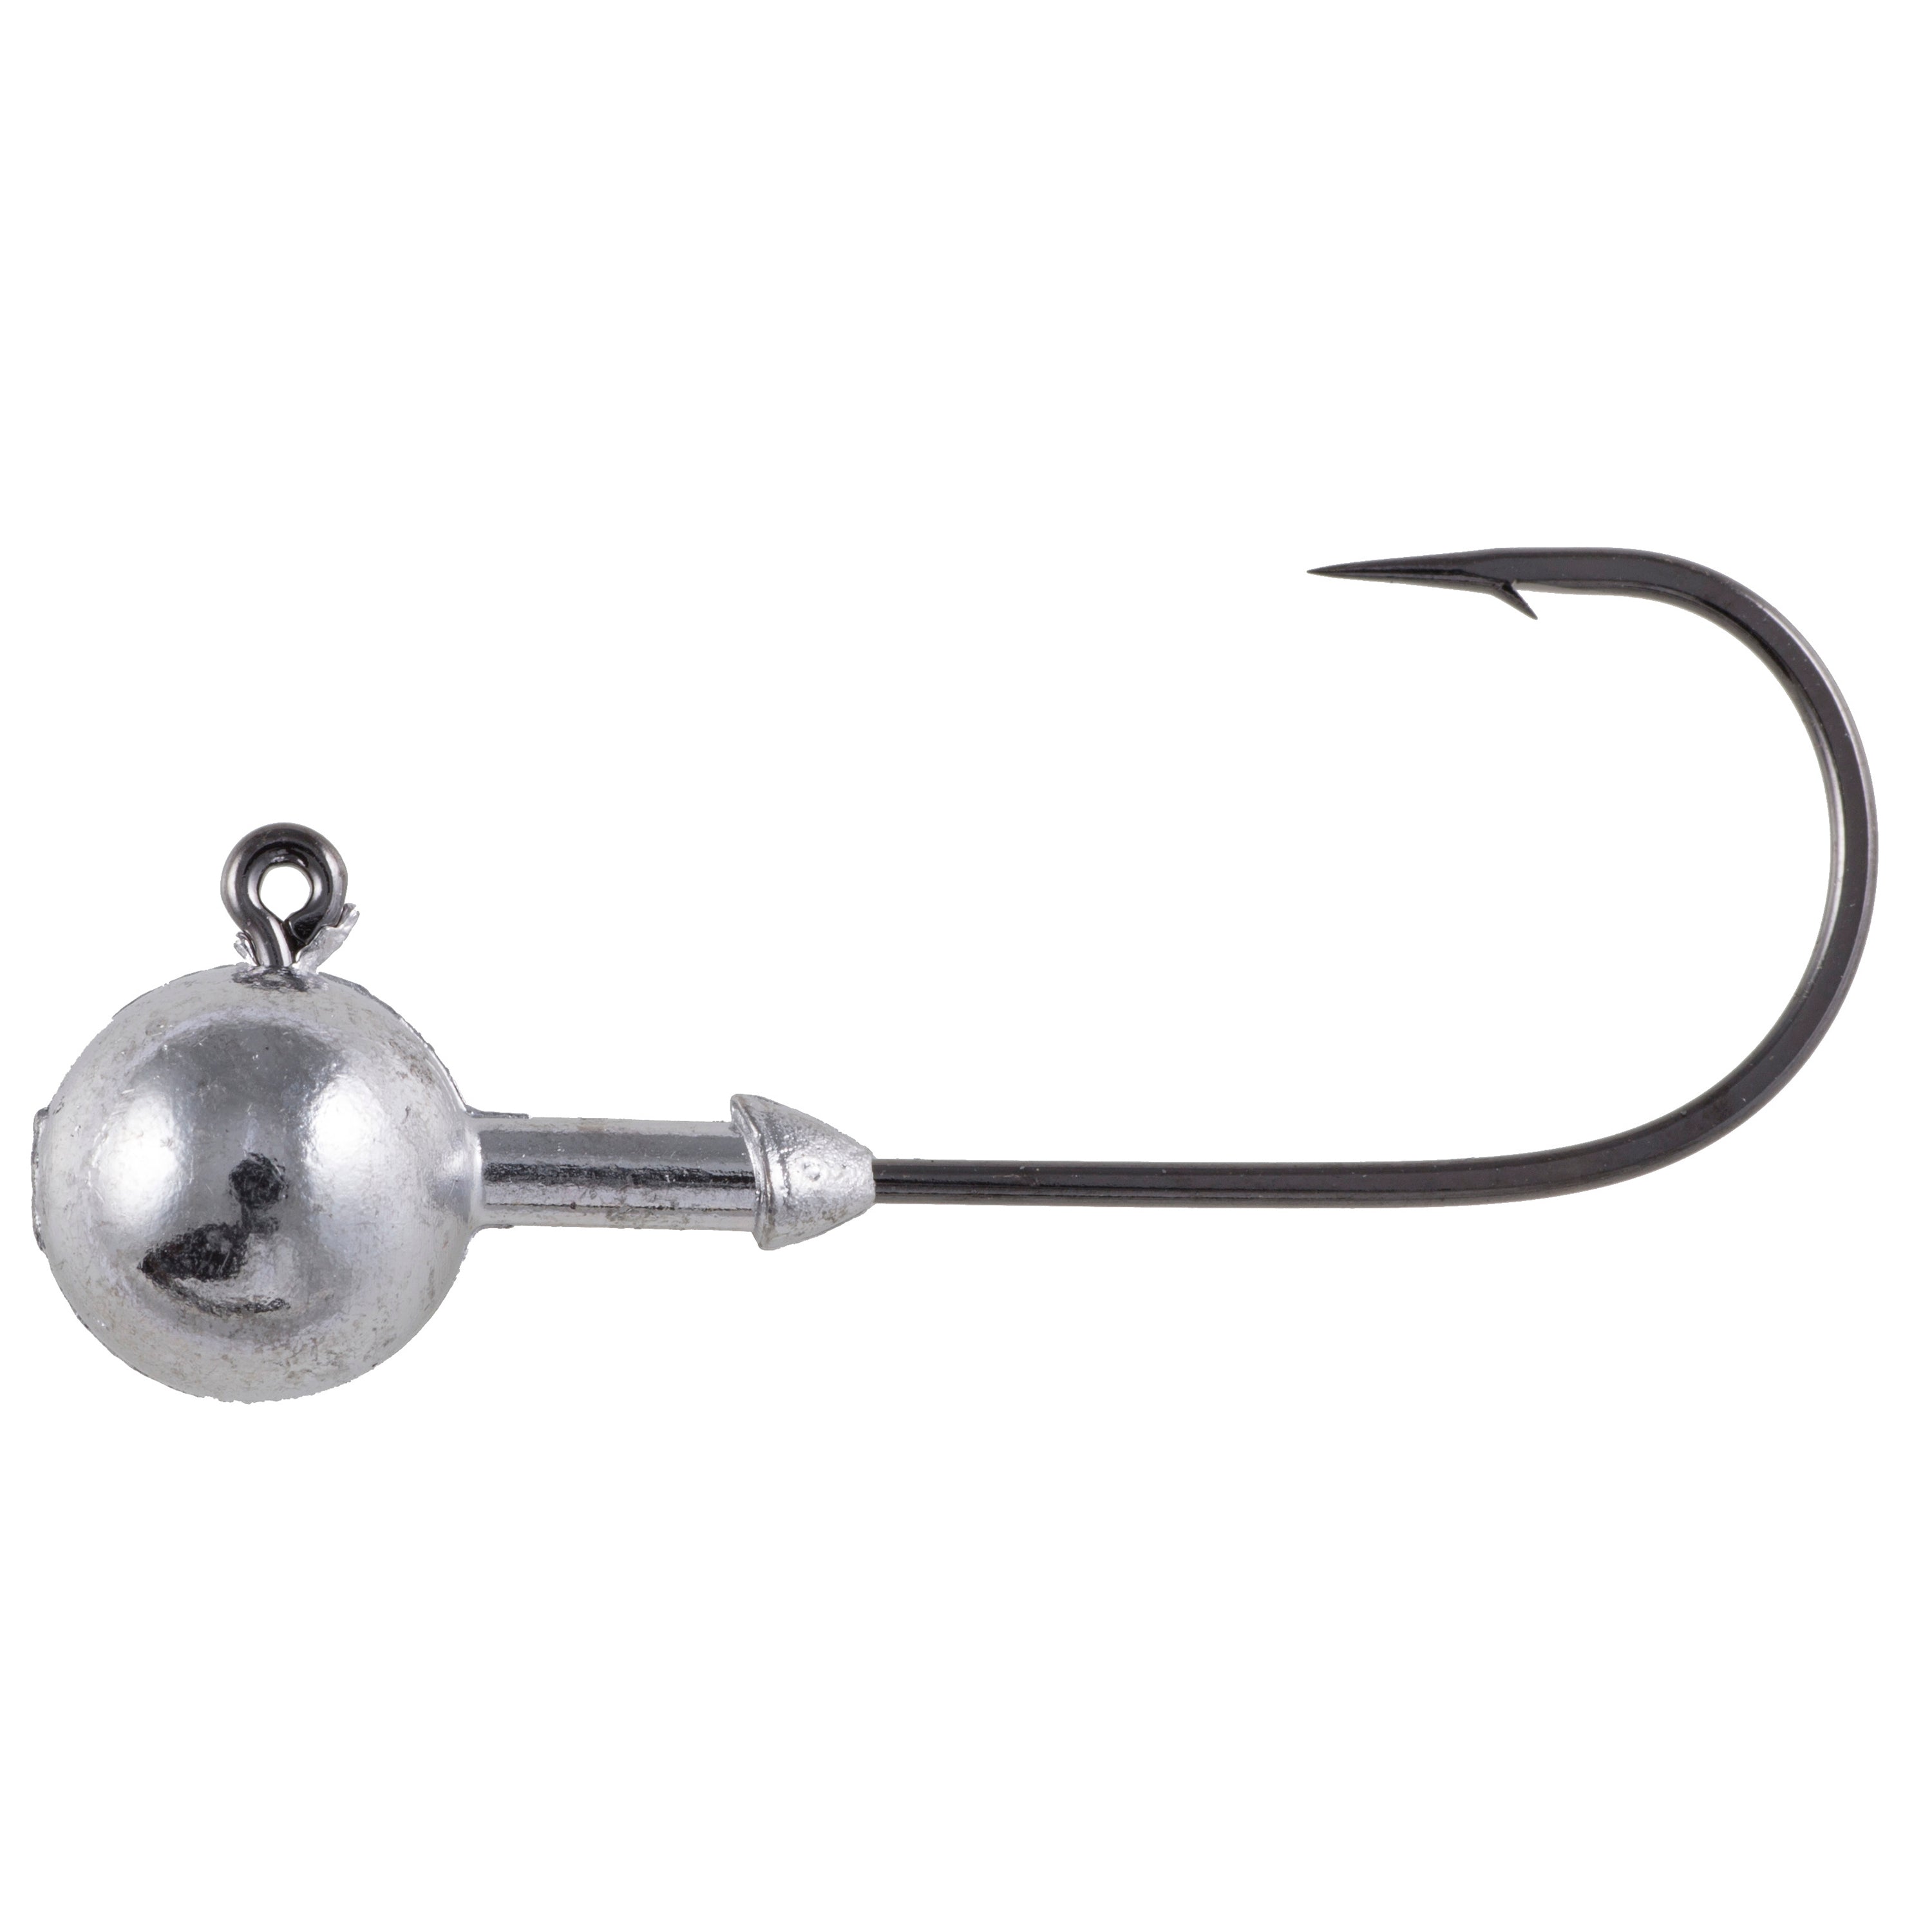 OWNER ROUND HEAD  - Copperstate Tackle